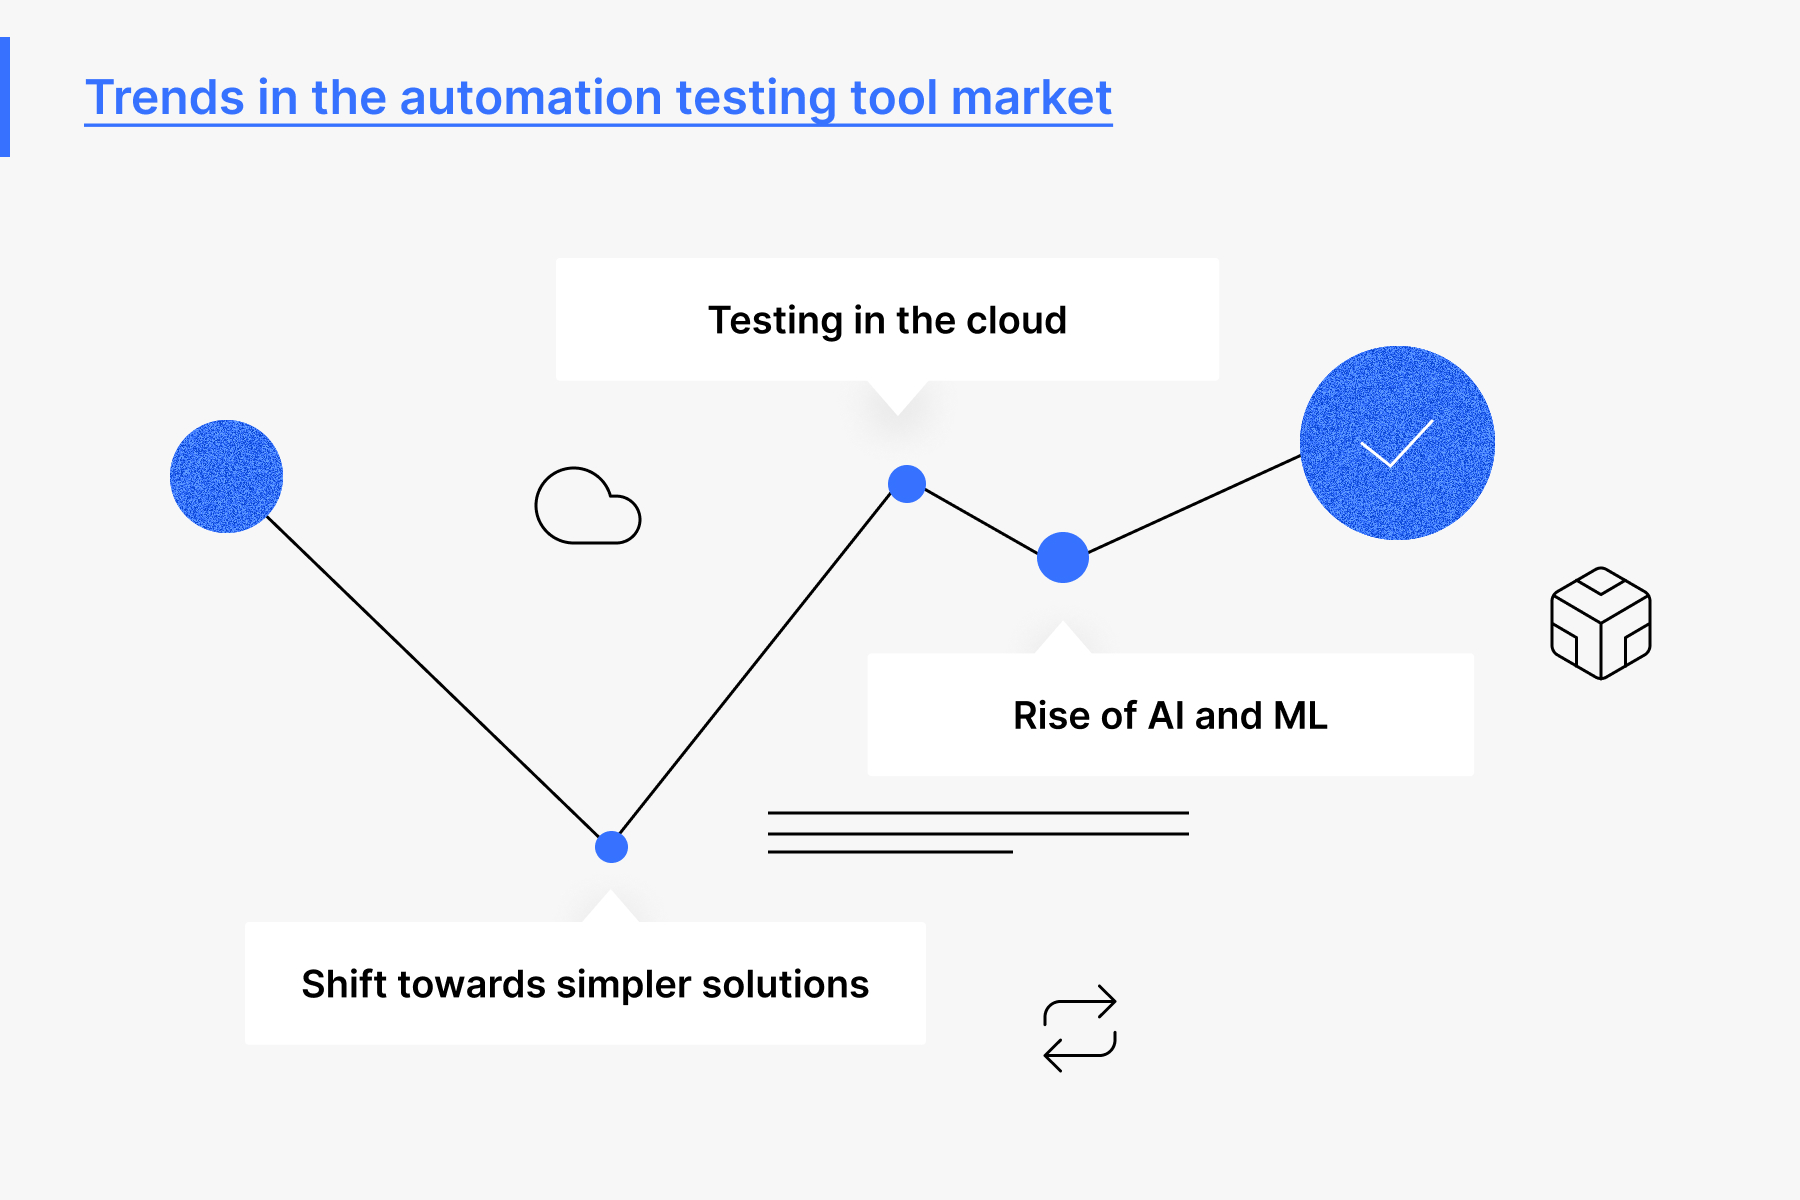 Trends in the automation testing tool market